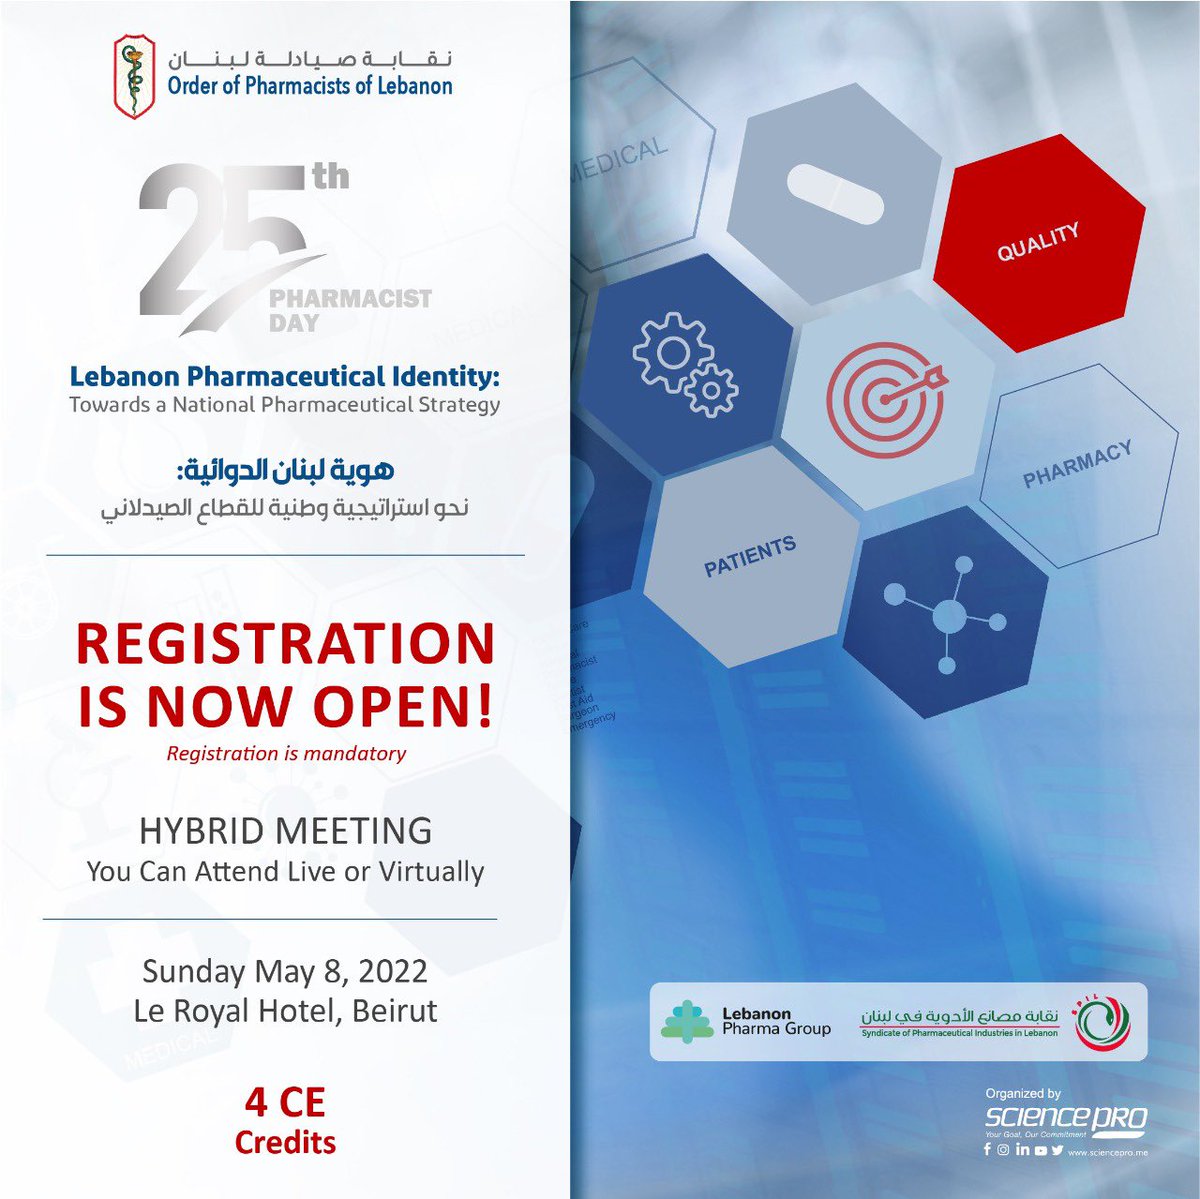 Registration is now open for the 25th Pharmacist Day!! Sunday 8 May 2022, Le Royal Hotel Beirut bit.ly/3roUSJa